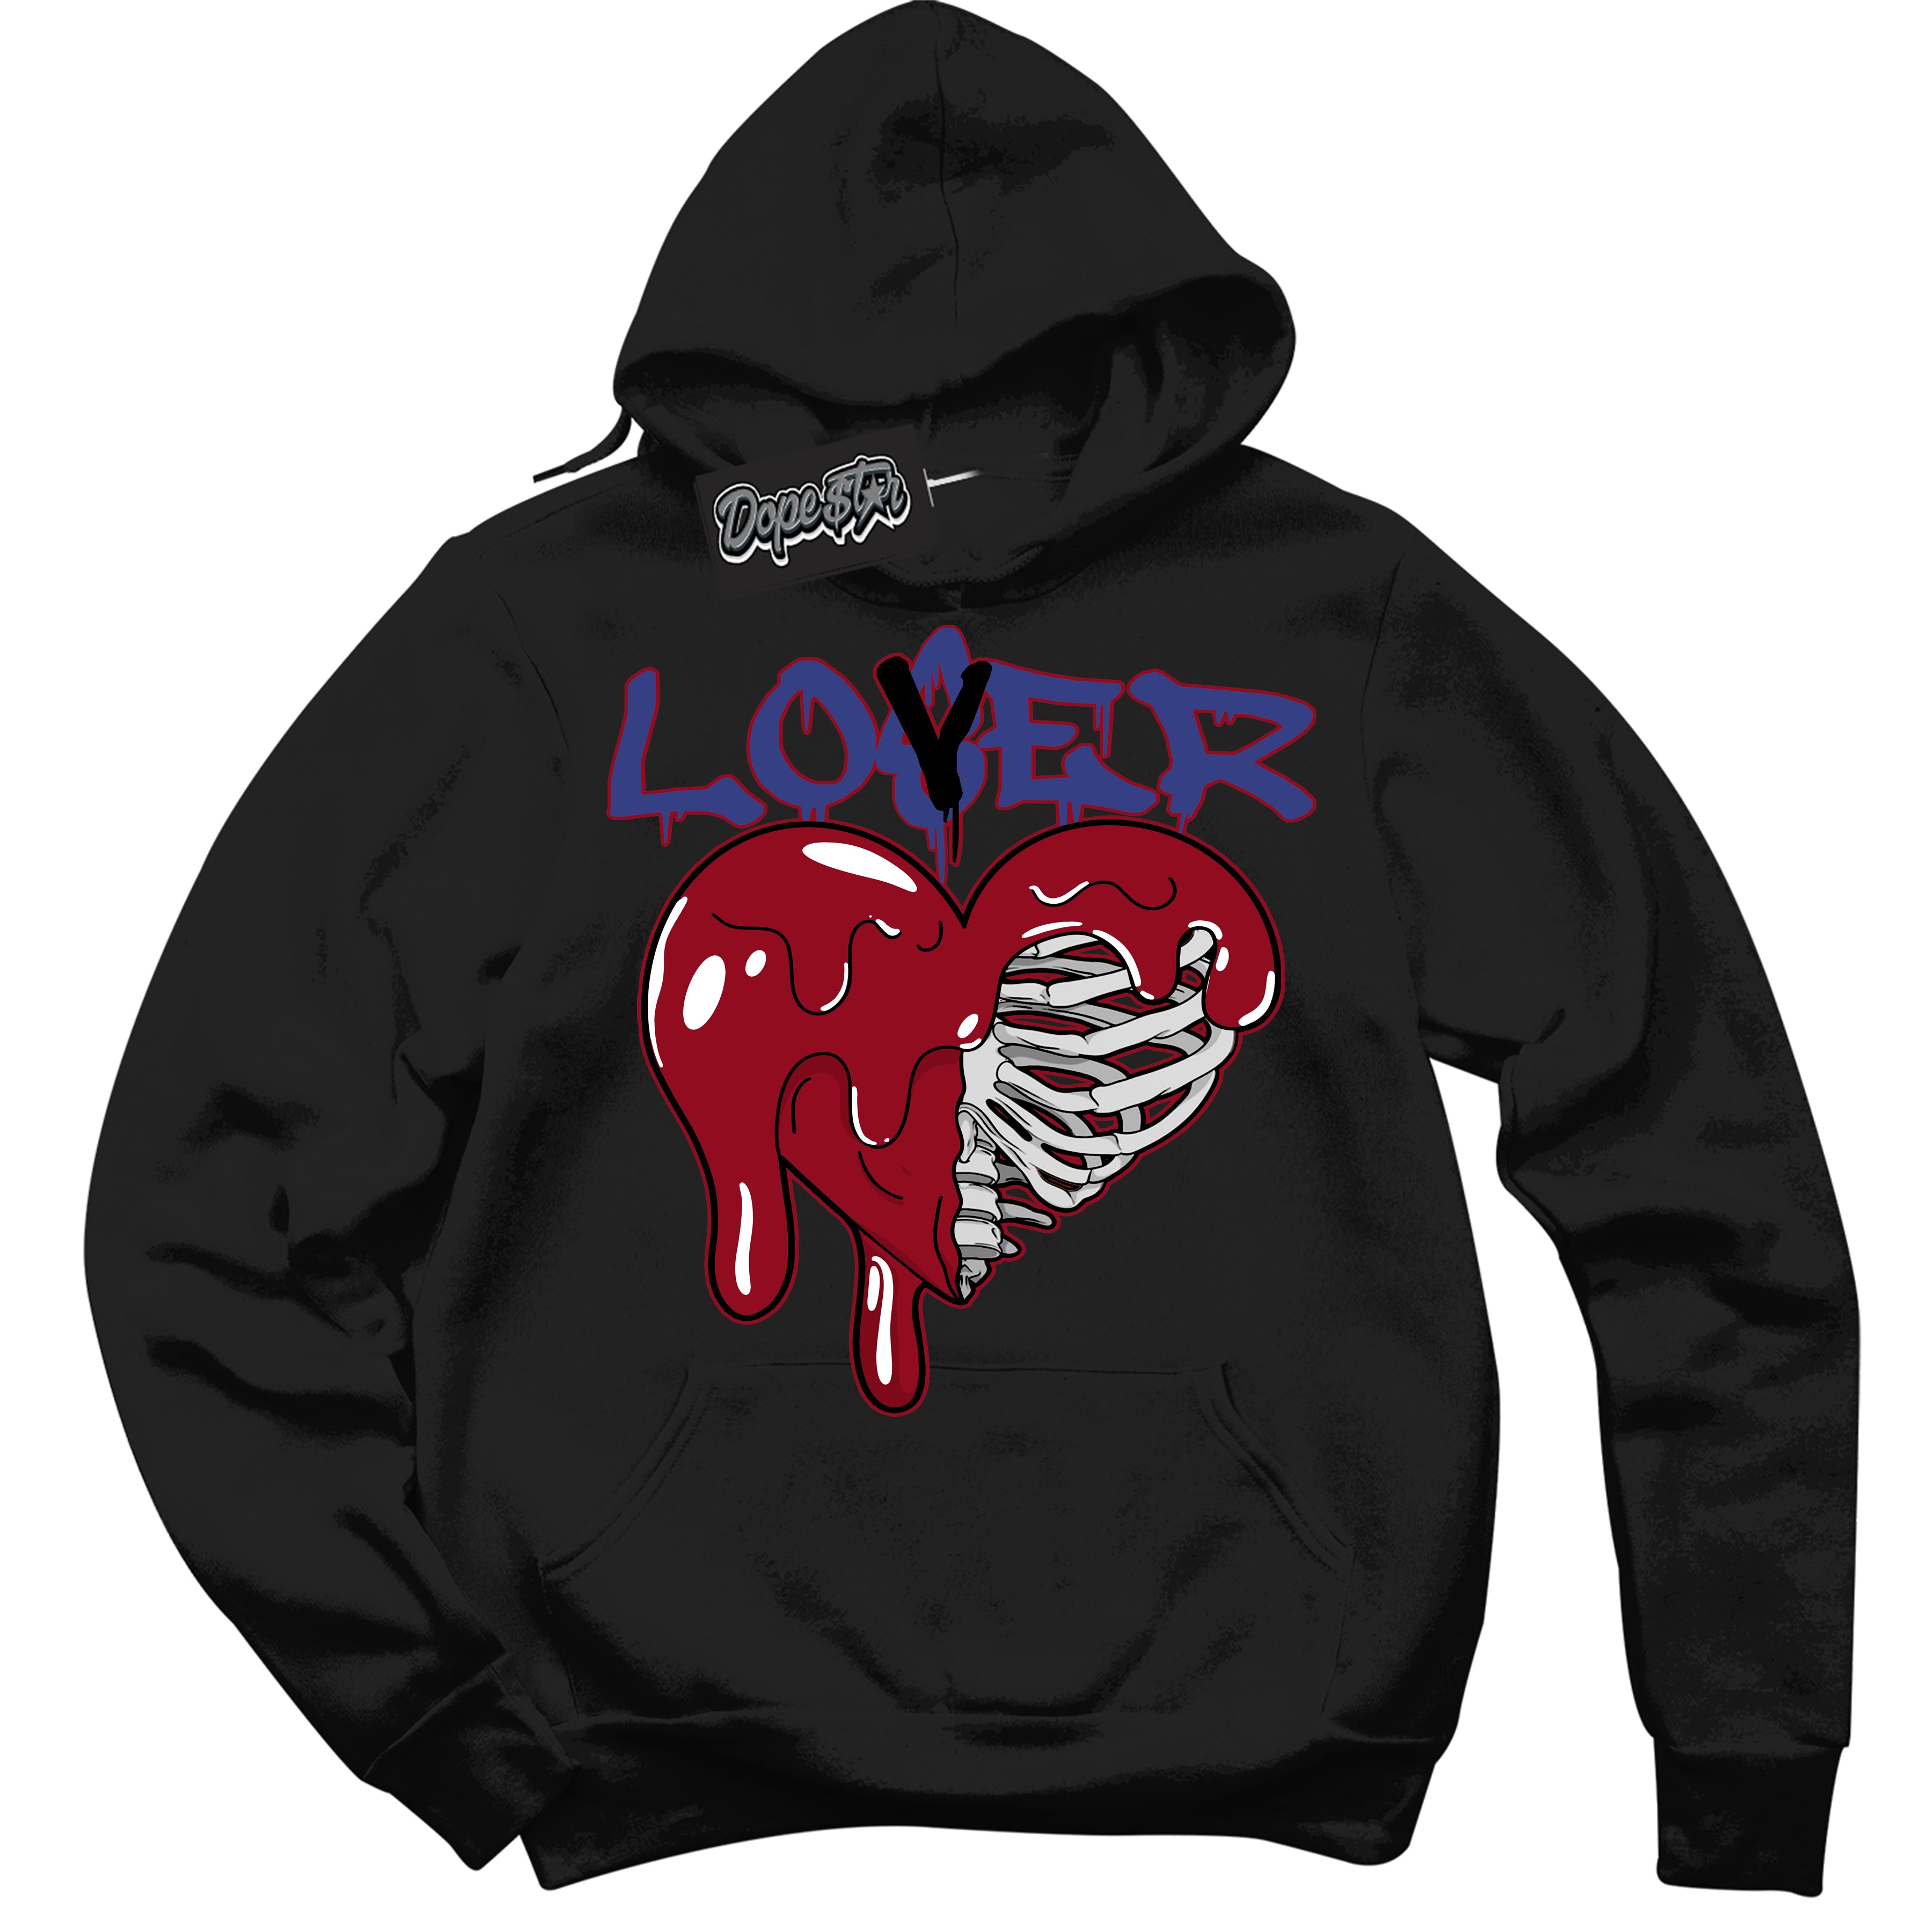 Cool Black Hoodie with “ Lover Loser ”  design that Perfectly Matches Playoffs 8s Sneakers.